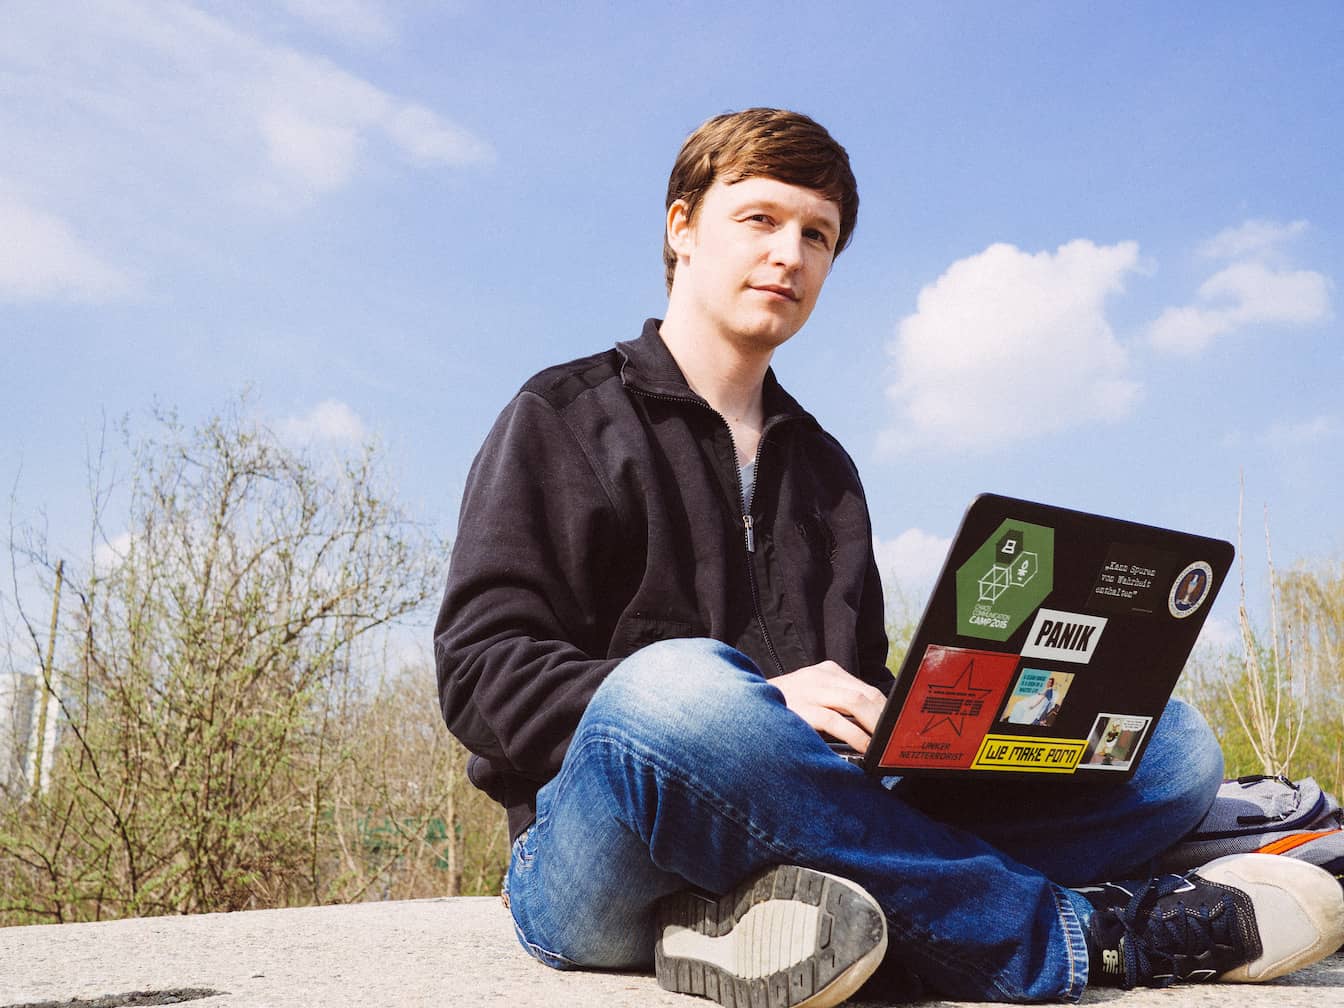 Some guy with a laptop sitting outdoors for no reason